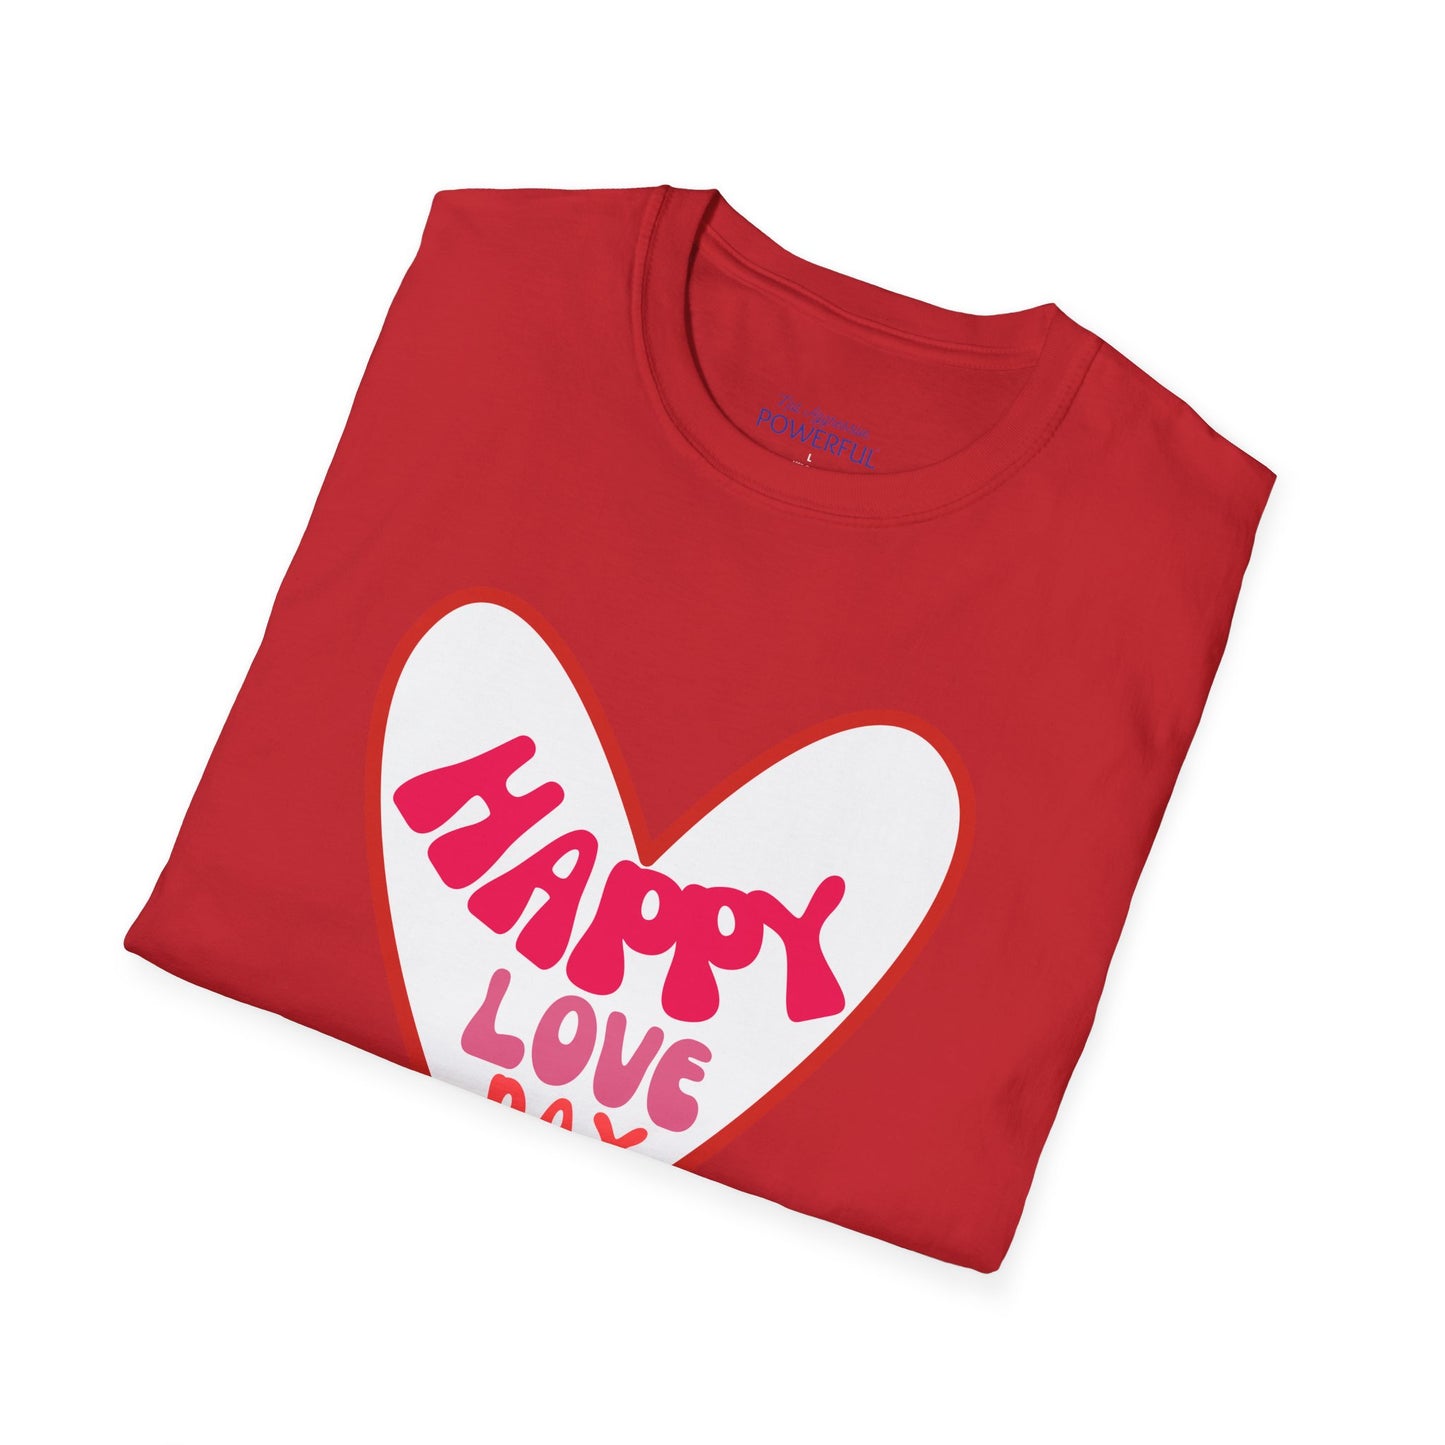 Happy love day-pink Not Aggressive. POWERFUL™️Unisex Softstyle T-Shirt Eurofit